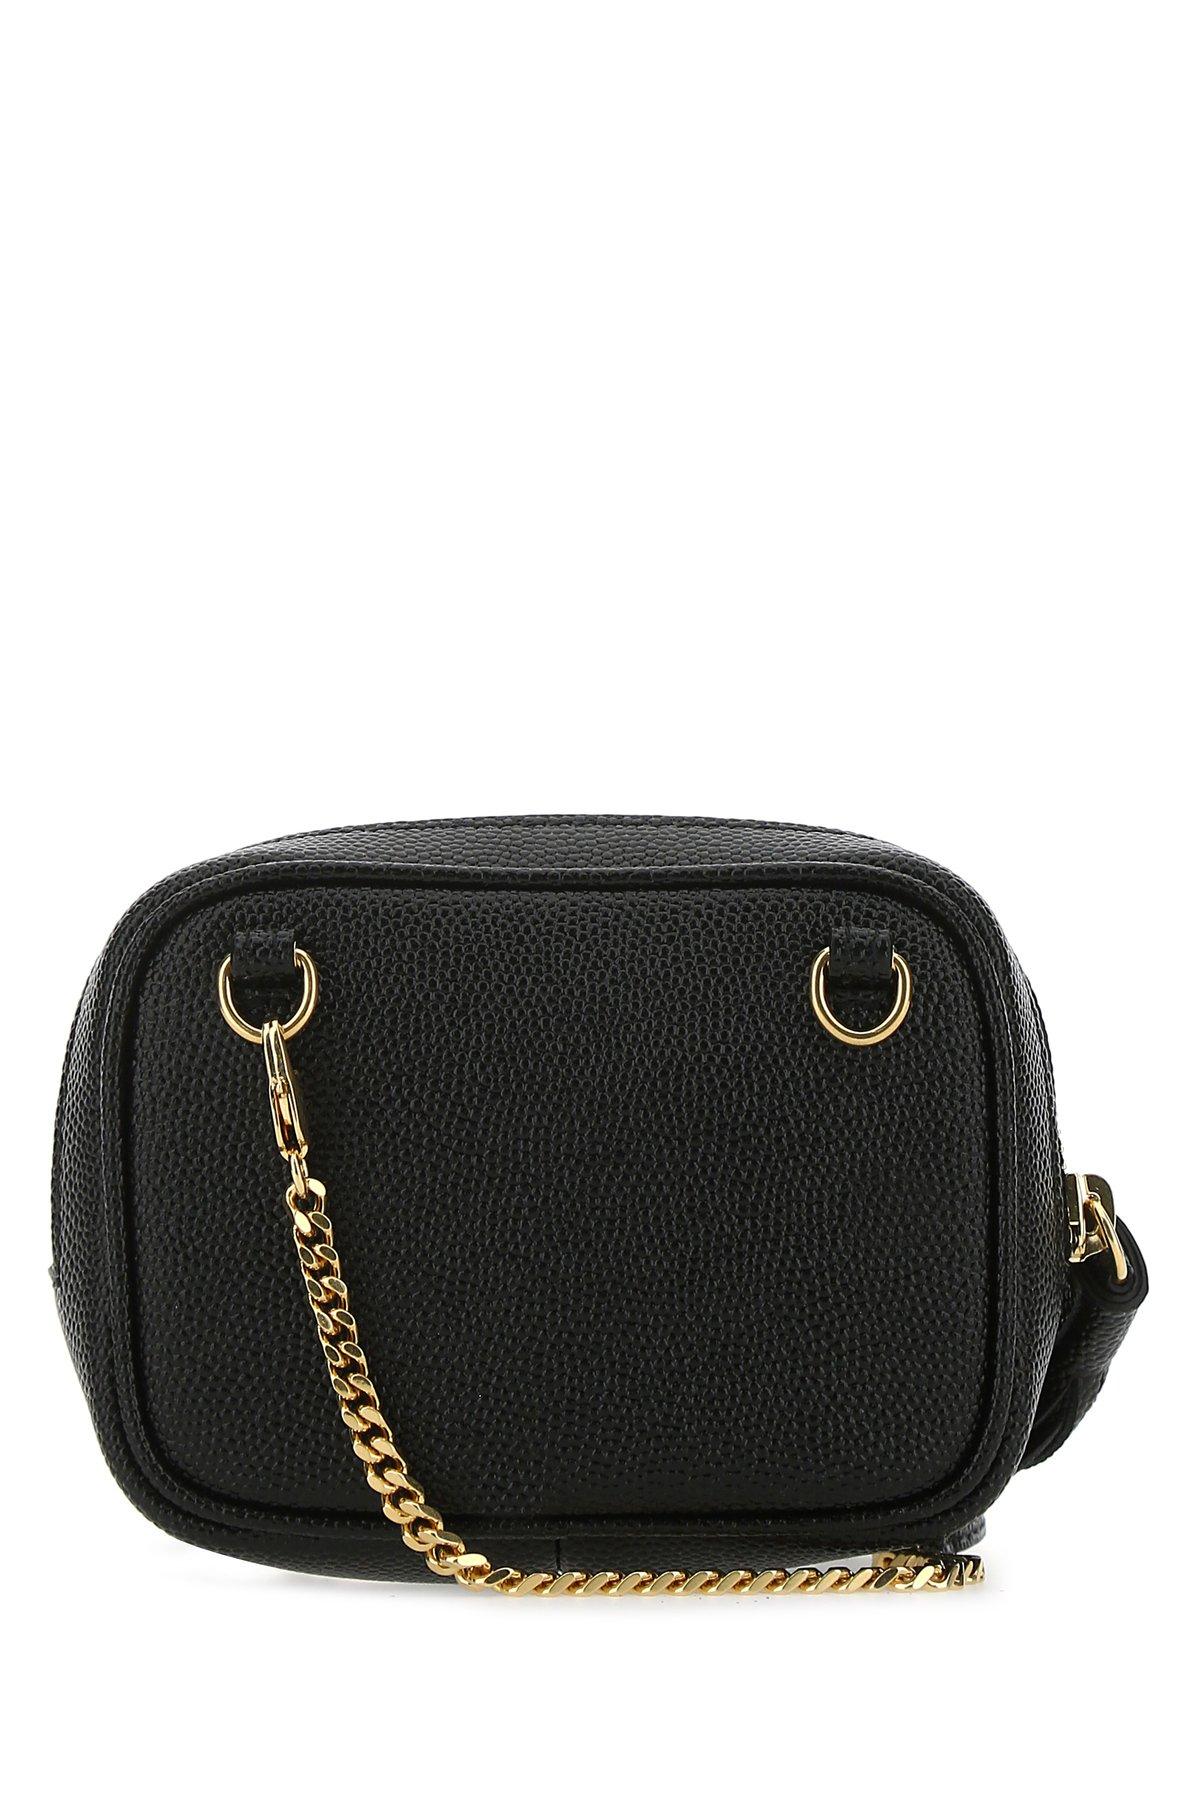 Saint Laurent Leather Lou Baby Crossbody Bag in Black - Save 14% - Lyst